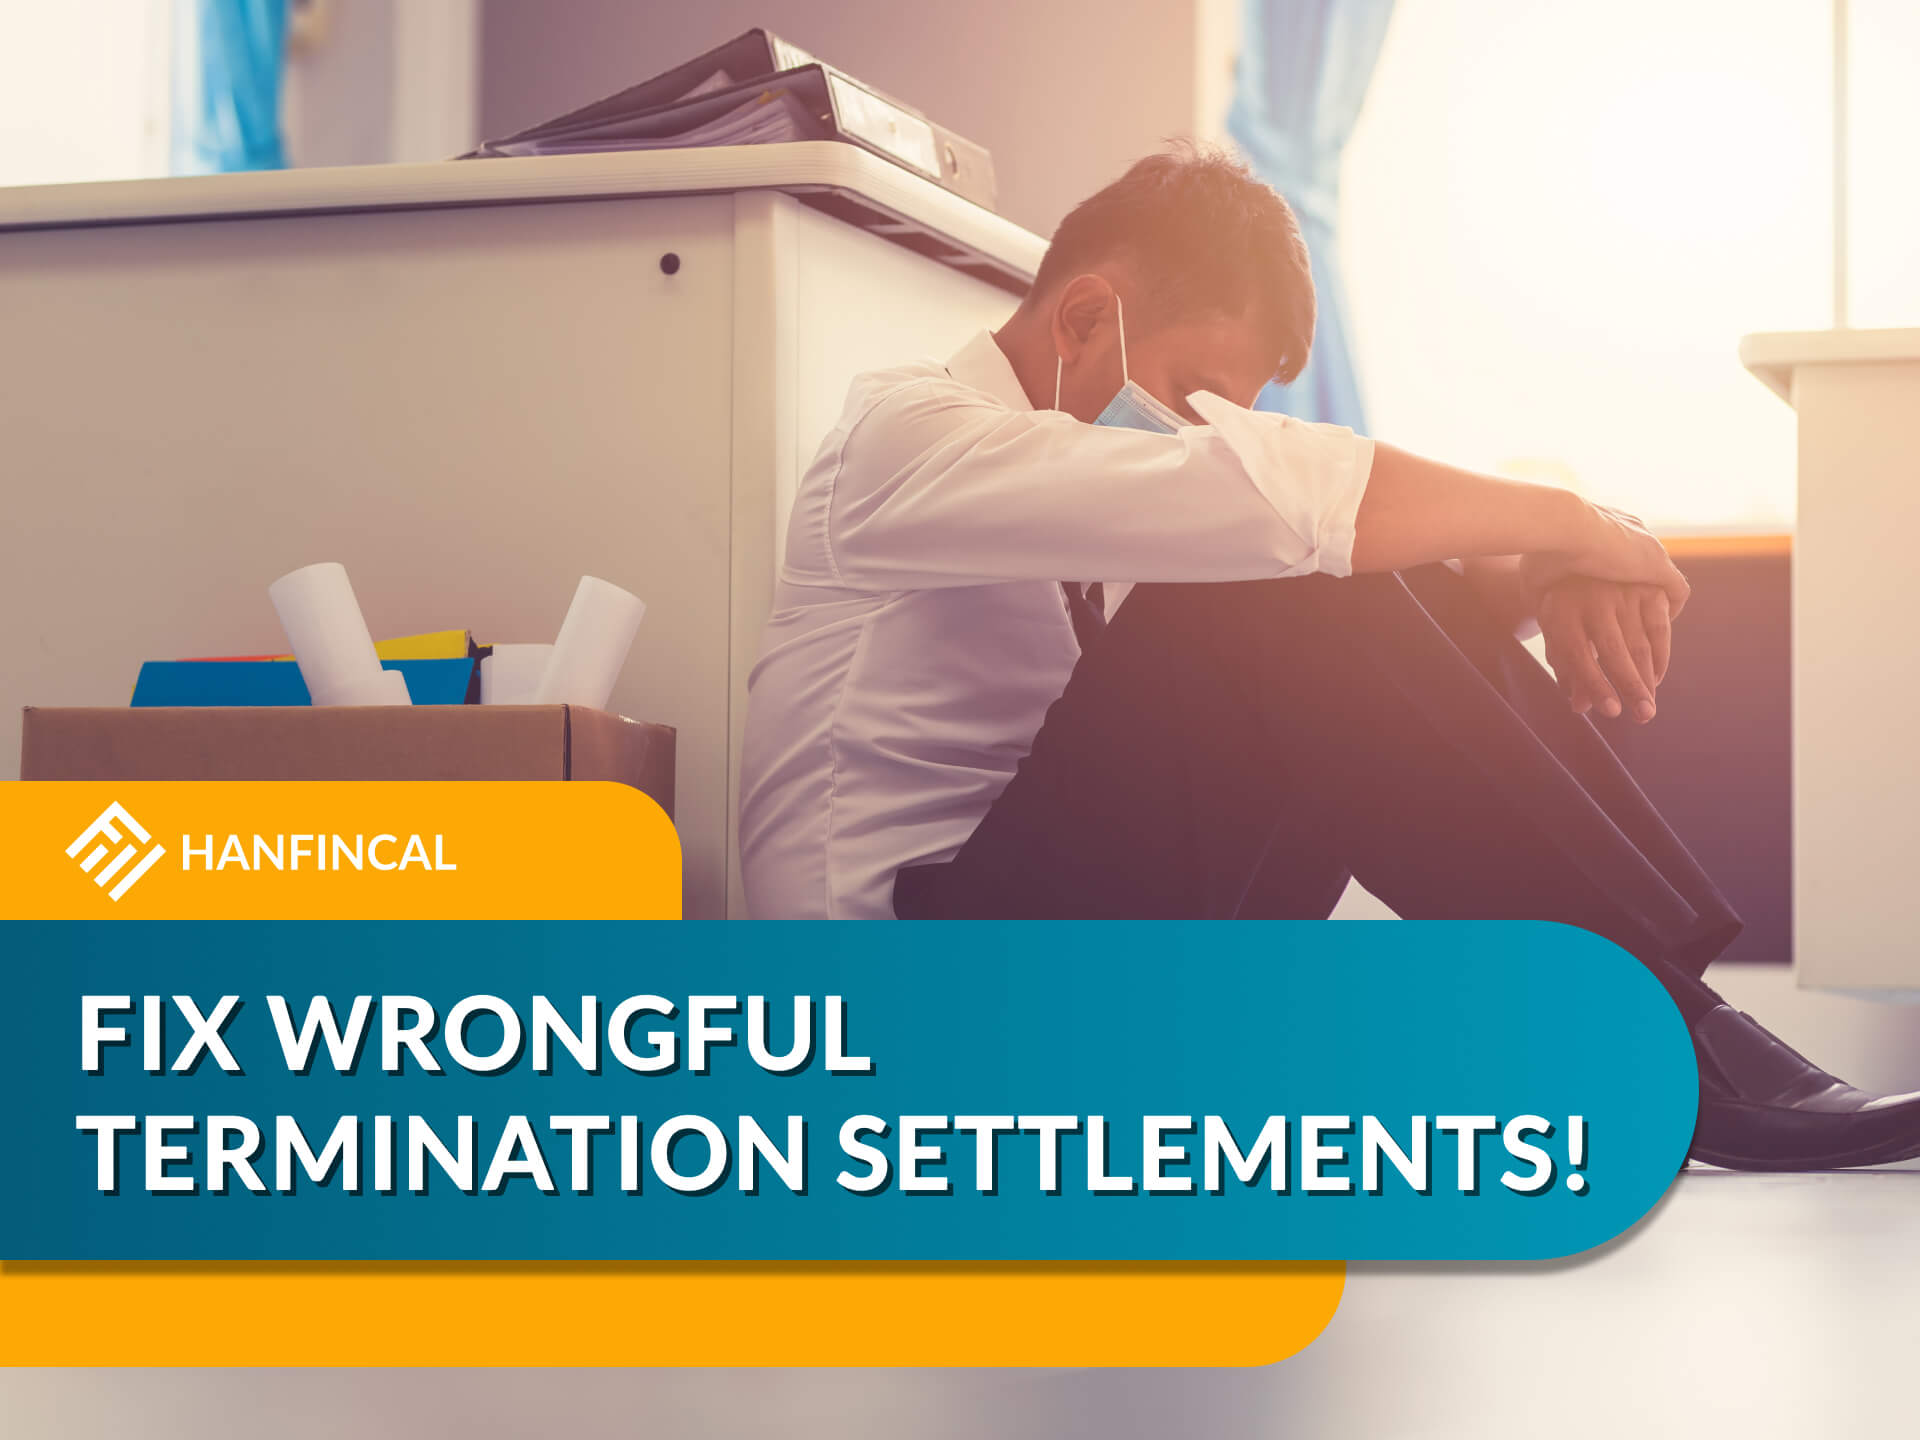 What Is The Average Wrongful Termination Settlement?